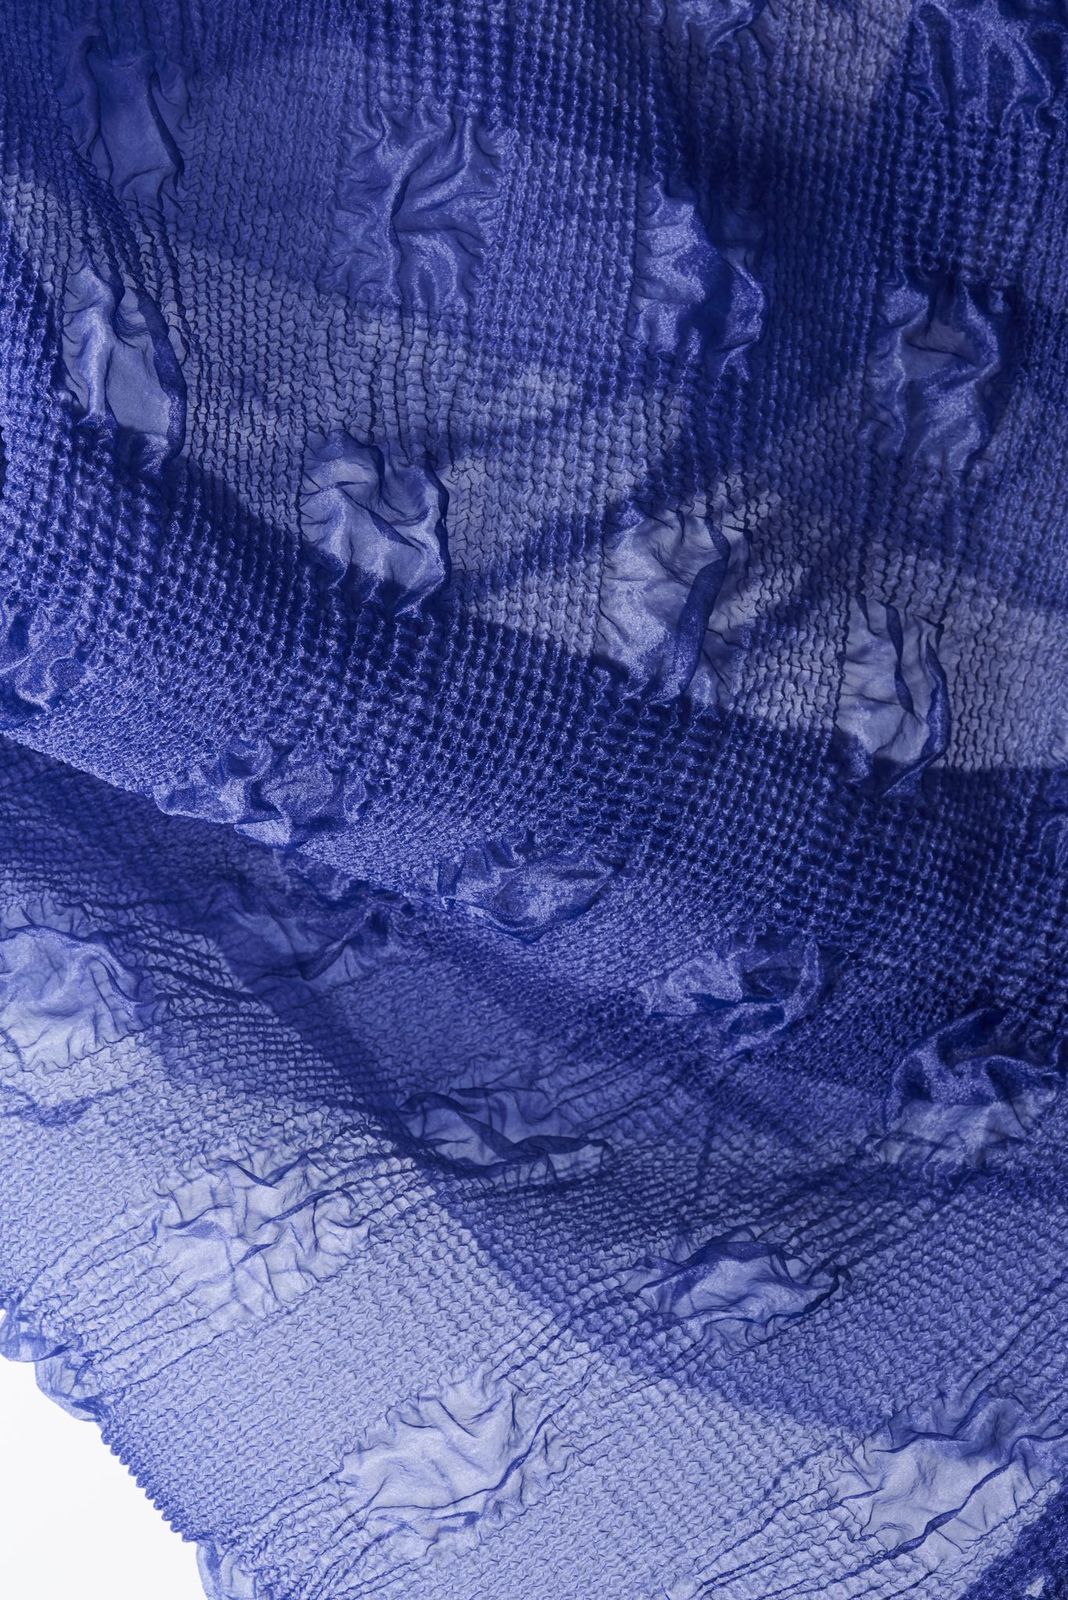 Blow up of a blue textile seen in transparency against a white background